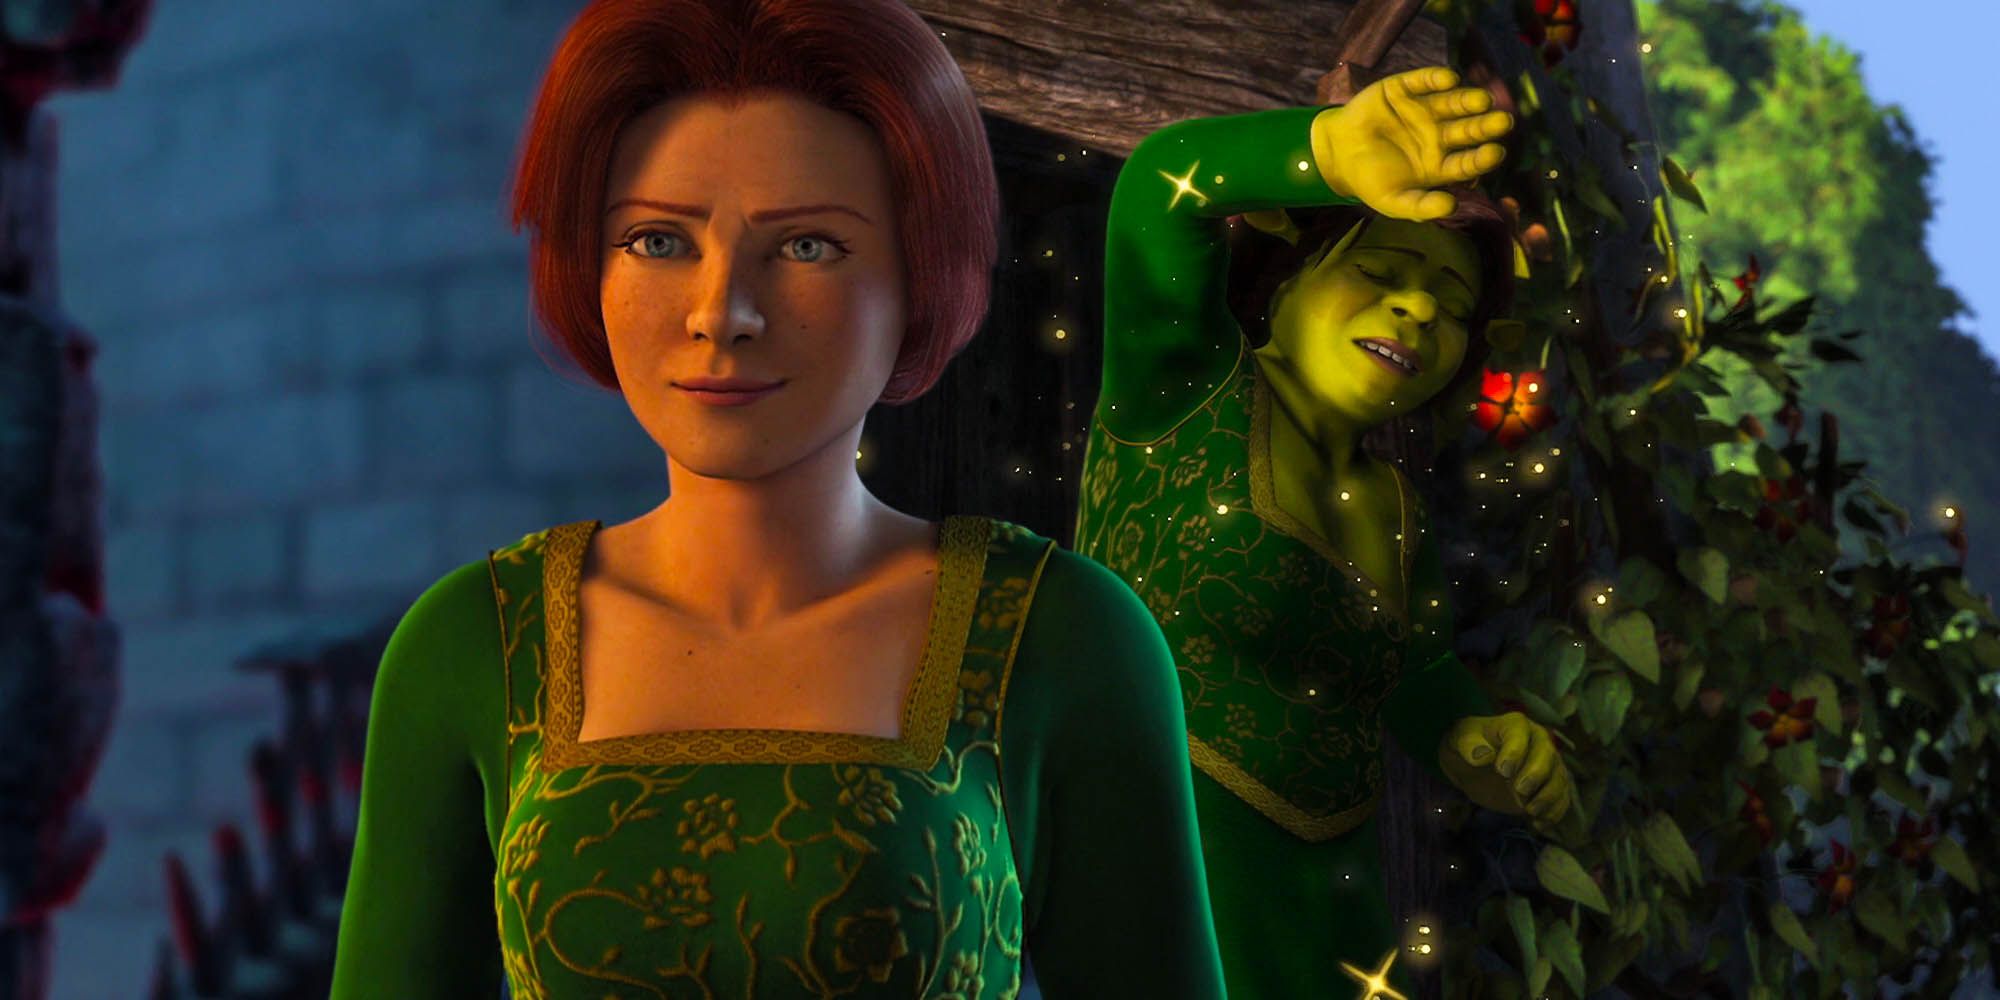 Shrek saved by simple fiona fix Enchanted ugly